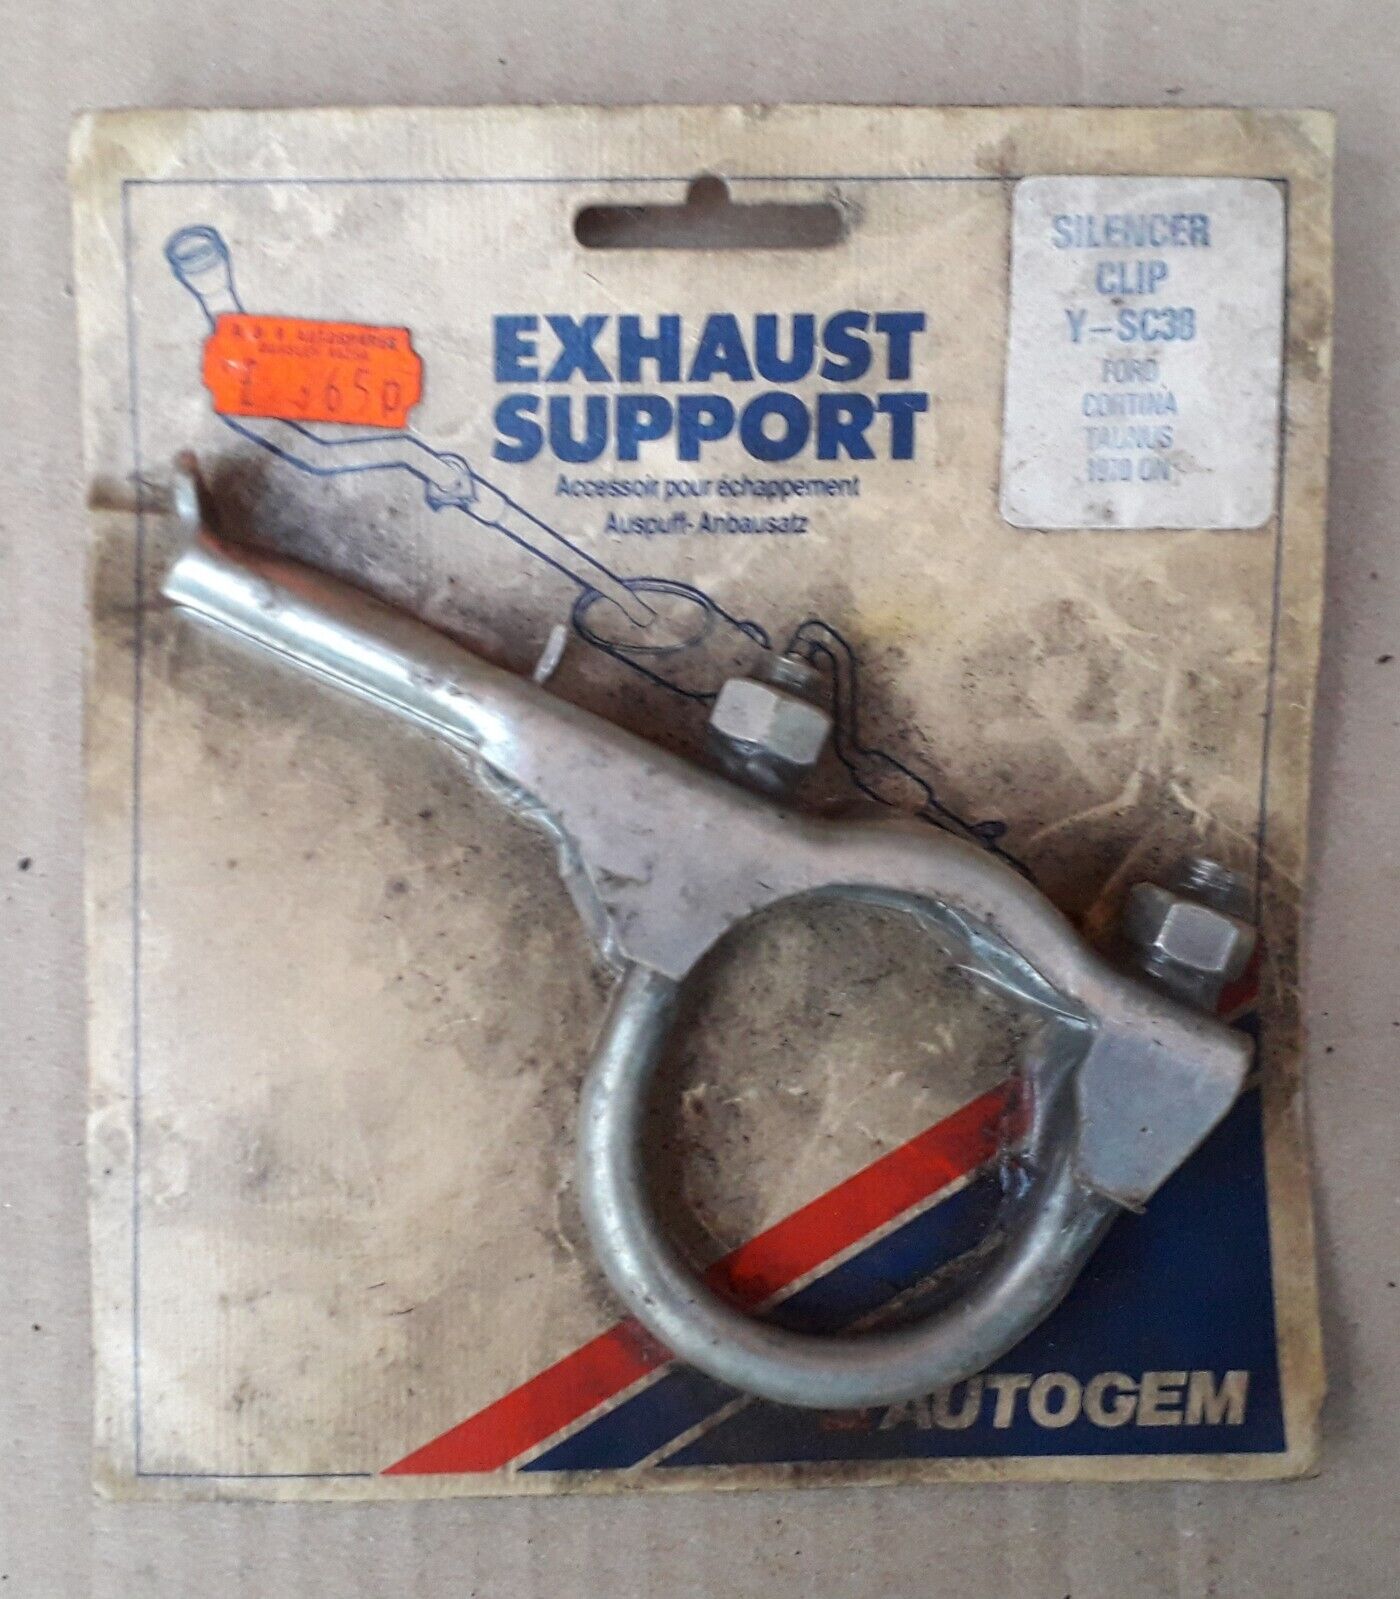 Ford Cortina EXHAUST SUPPORT Autogem Part Y-SC38